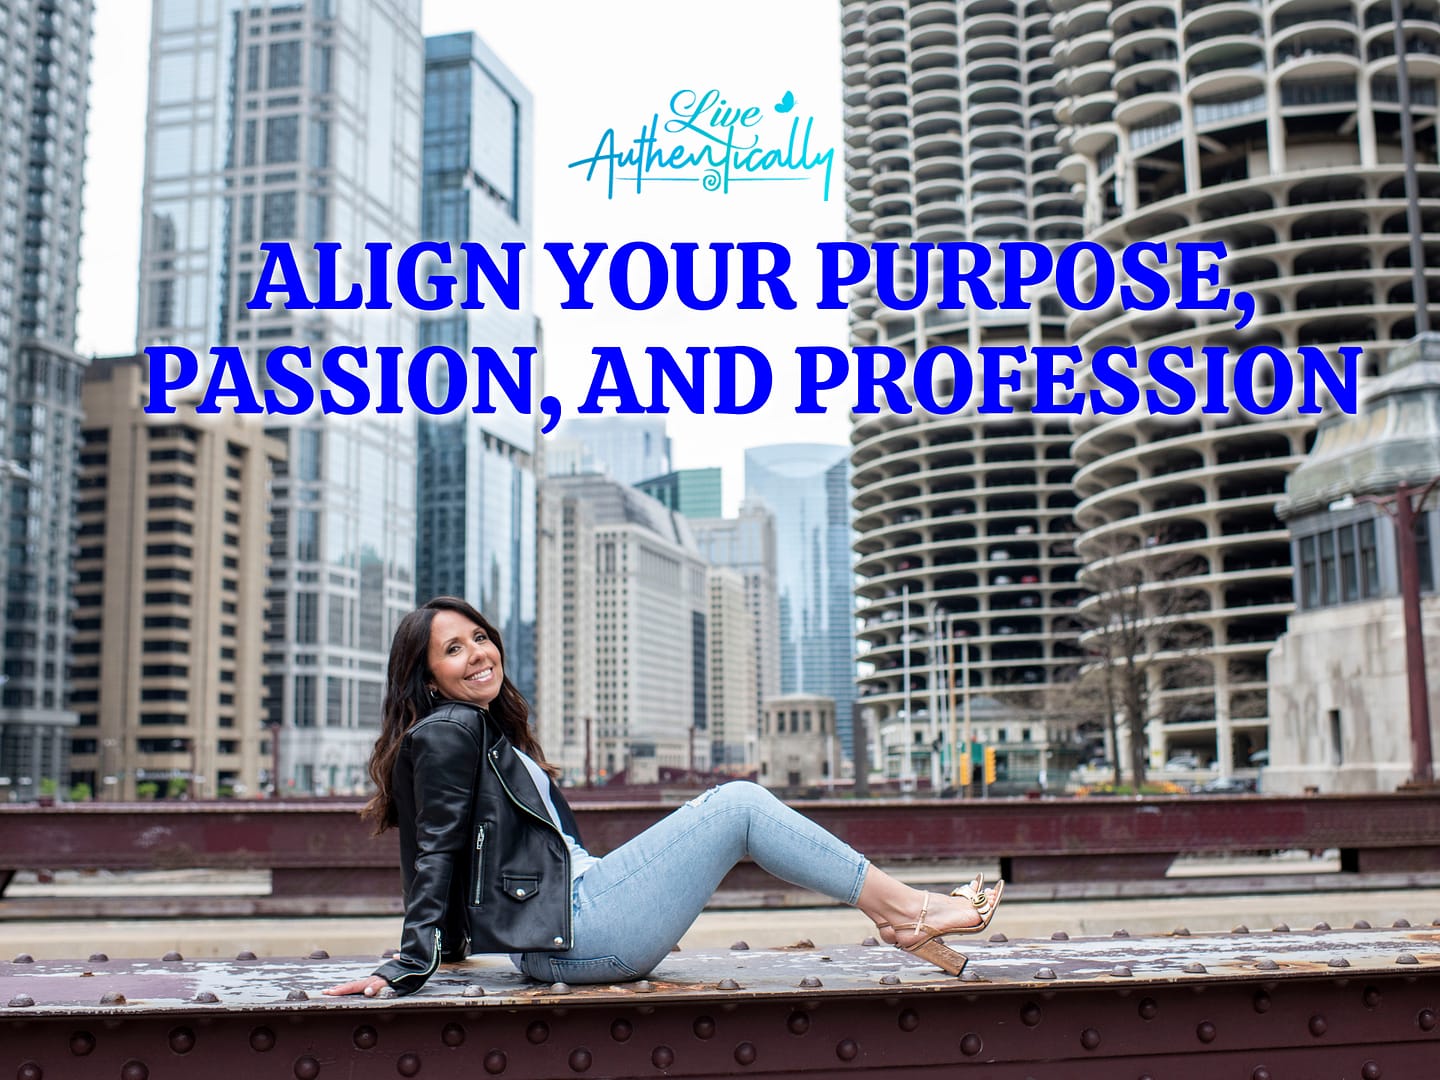 Align Your Purpose, Passion, and Profession